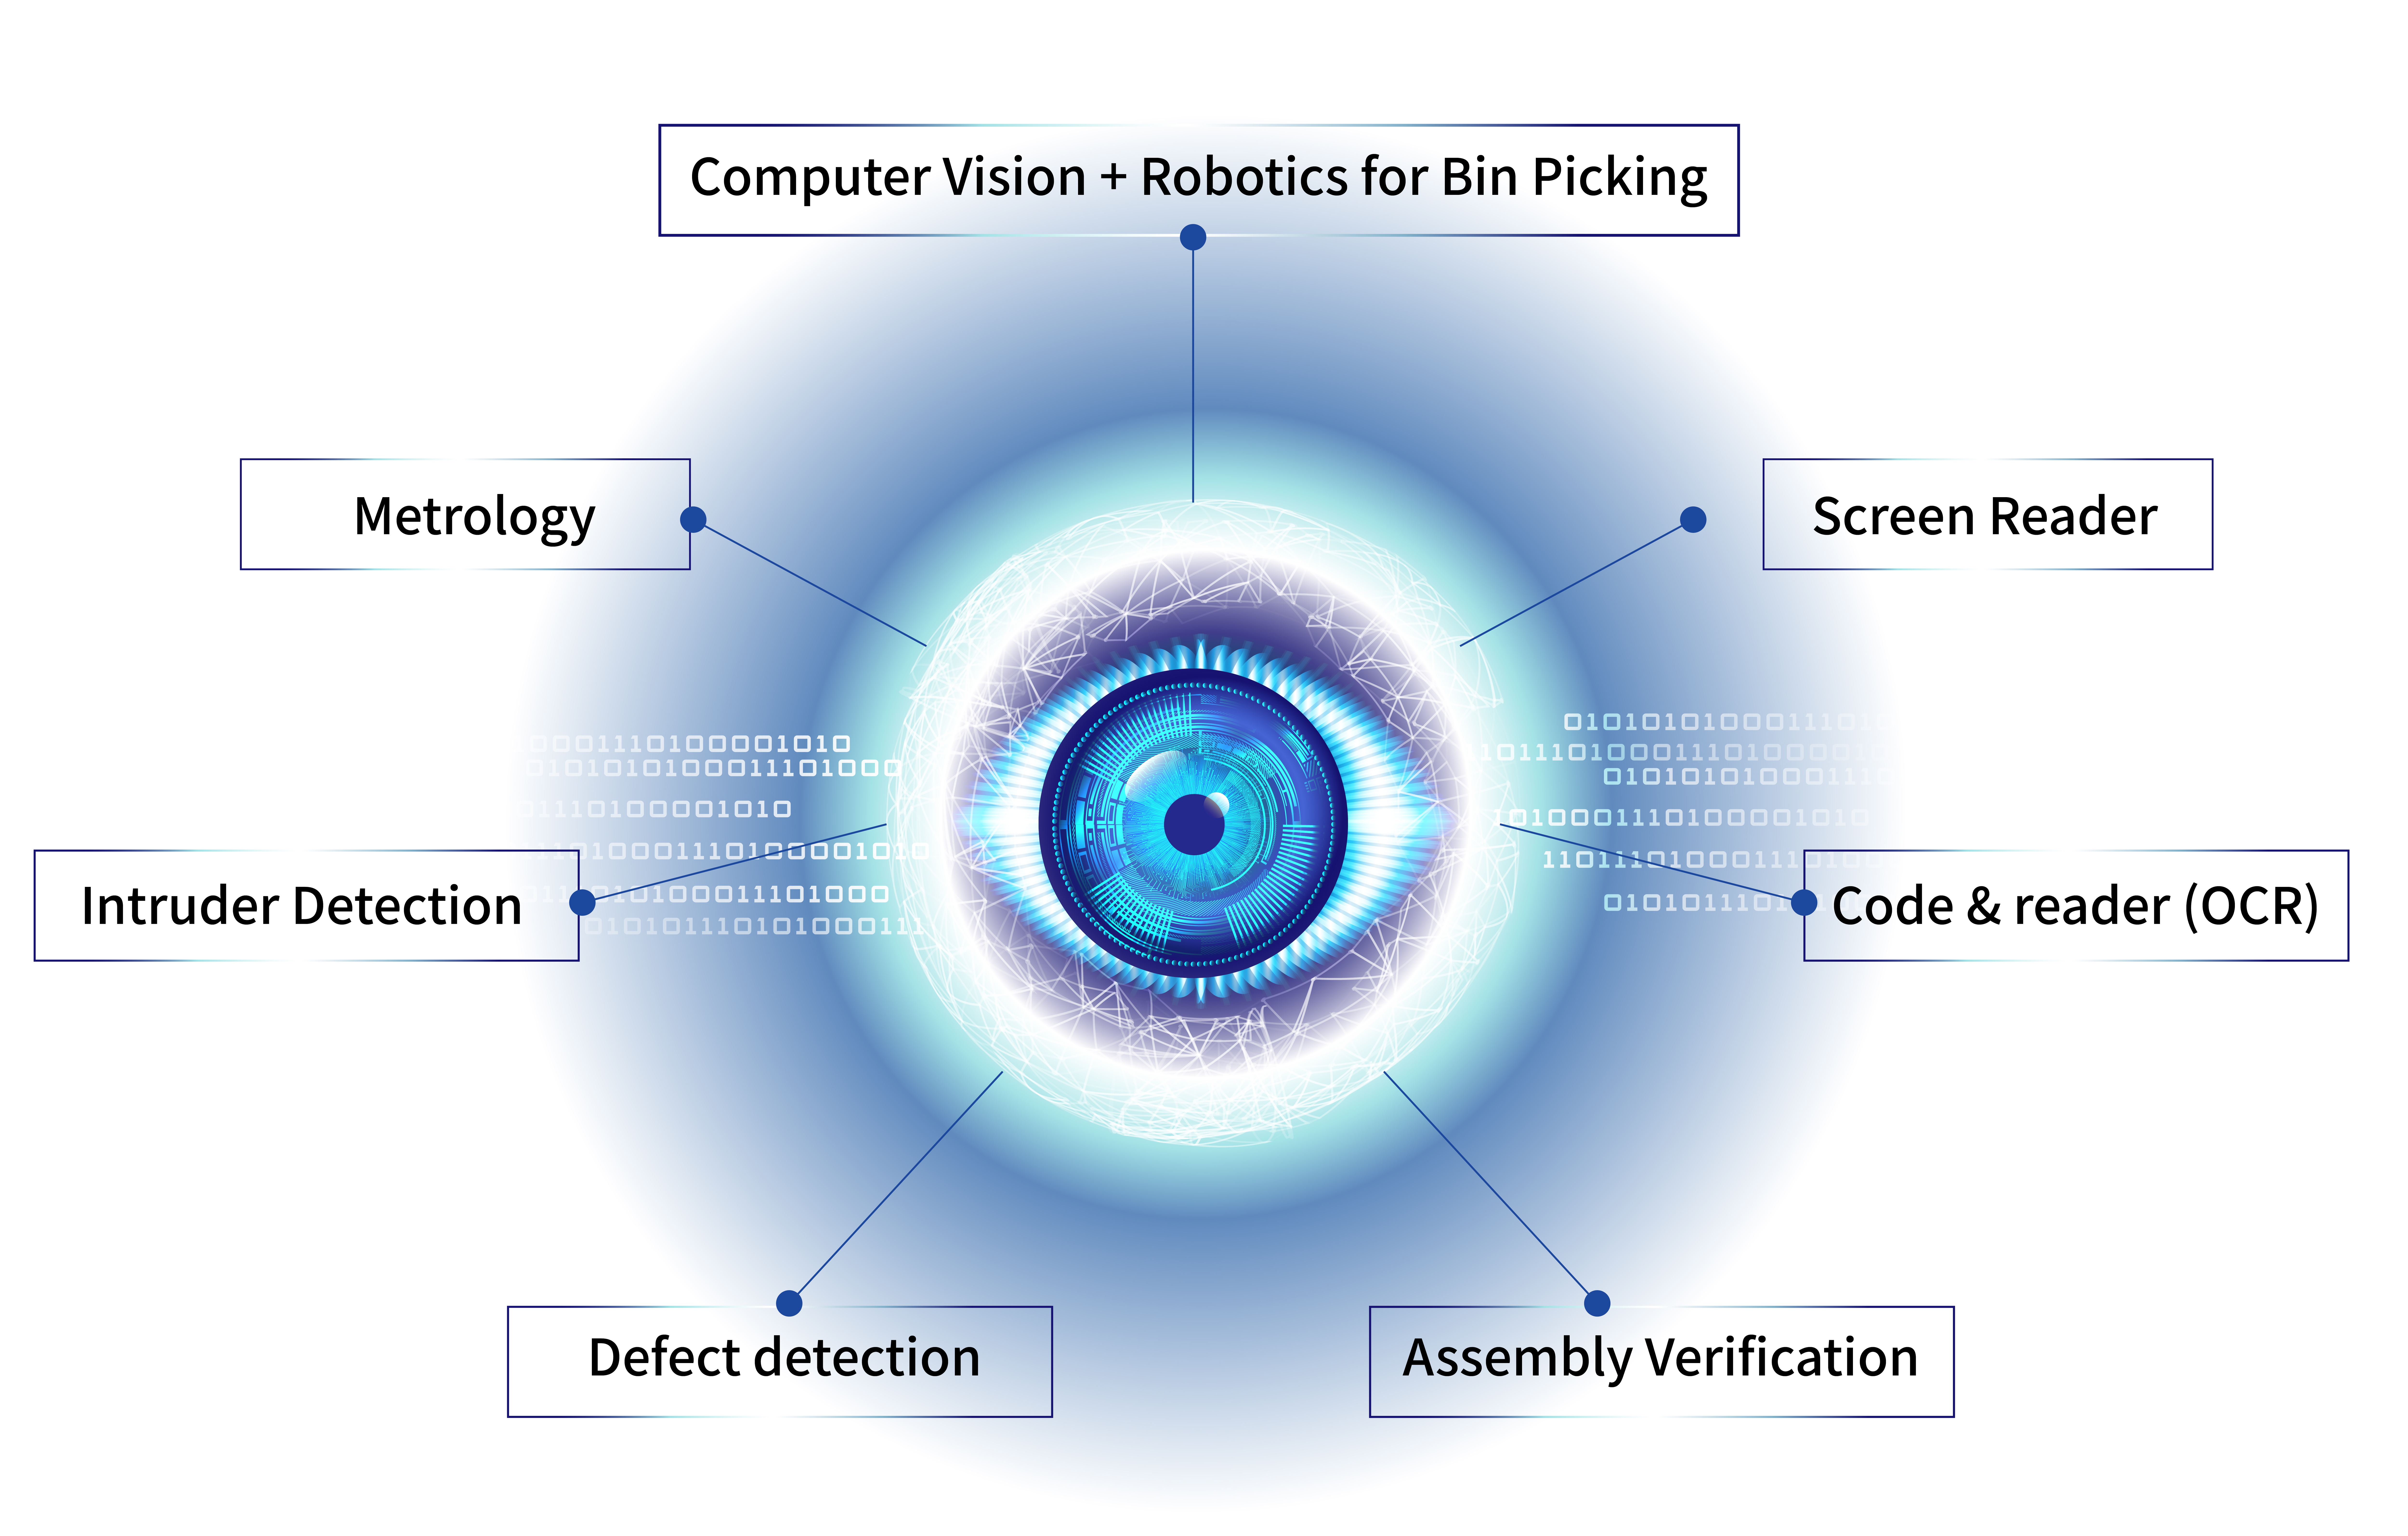 Robust Infrastructure Drive Computer Vision